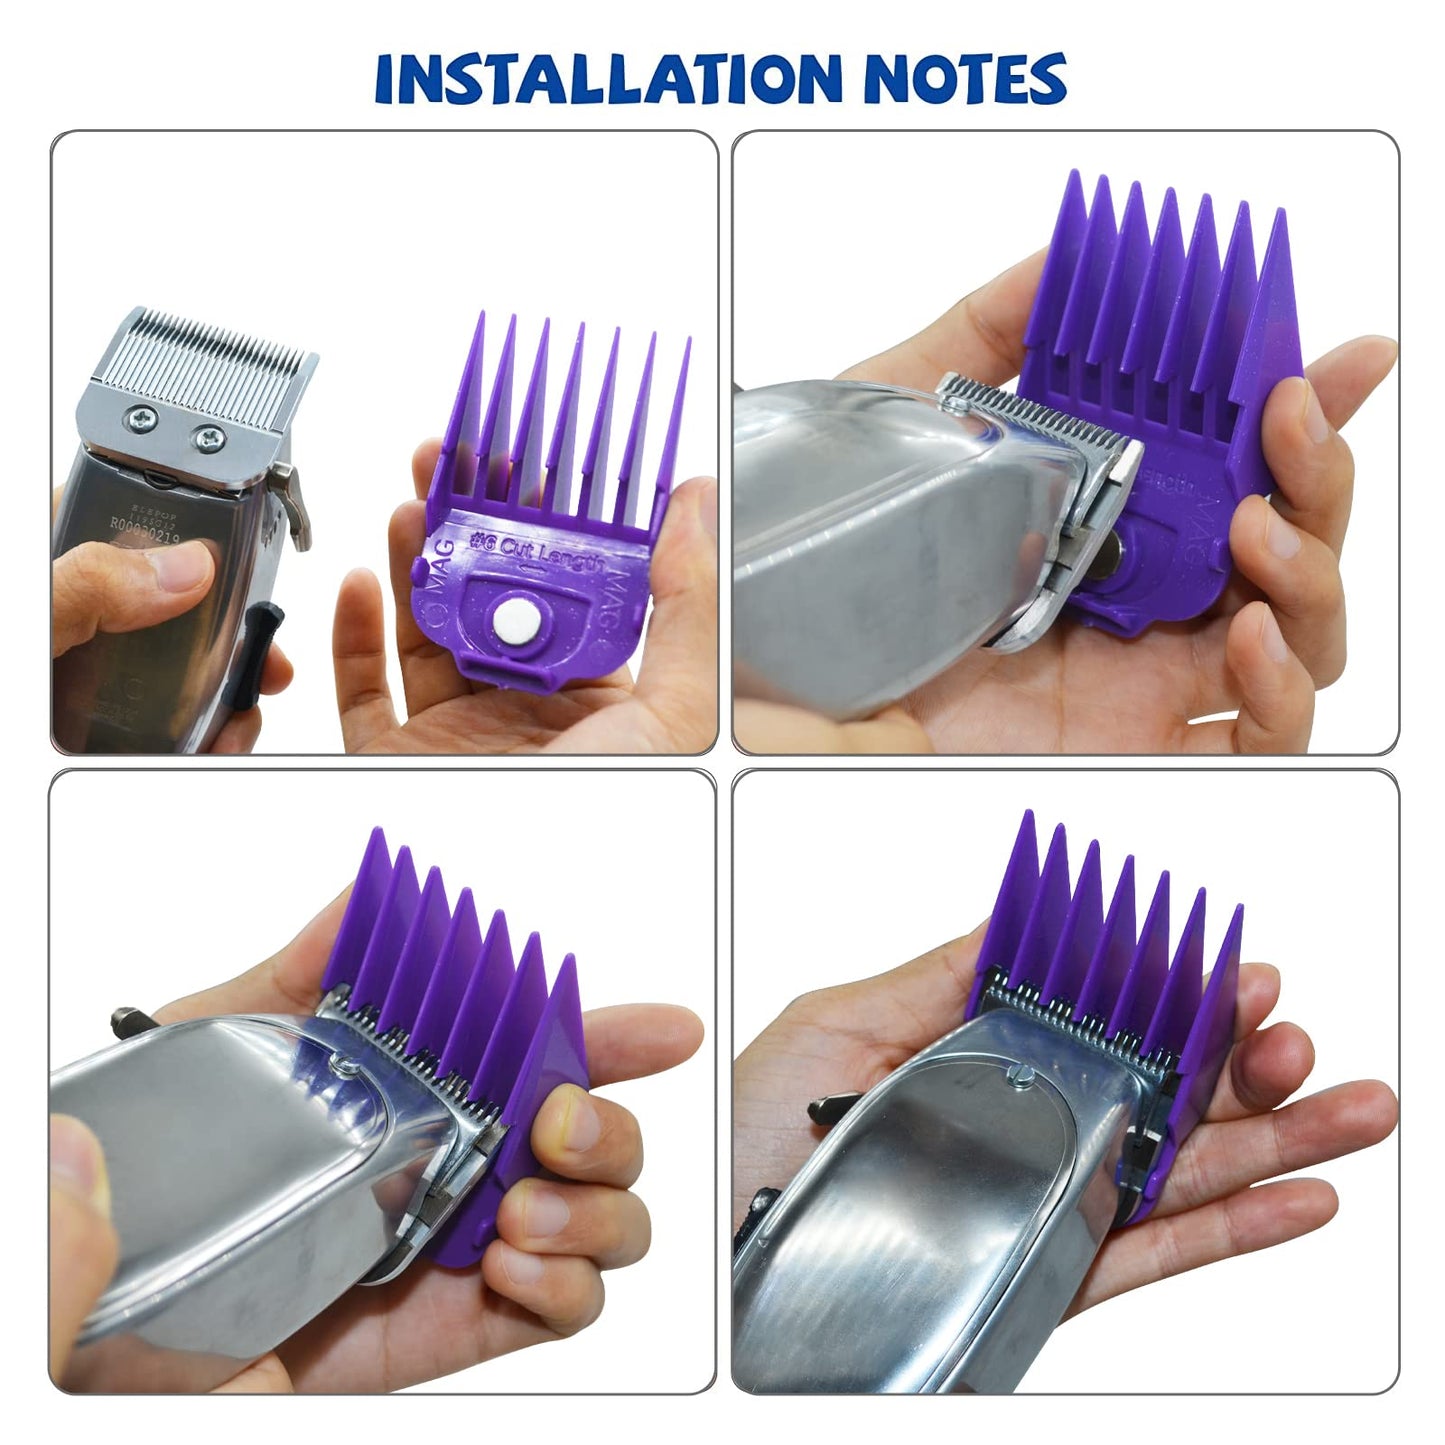 Magnetic Clipper Guards Guide Comb 10pcs Set Compatible with Andis Master Hair Clippers Purple